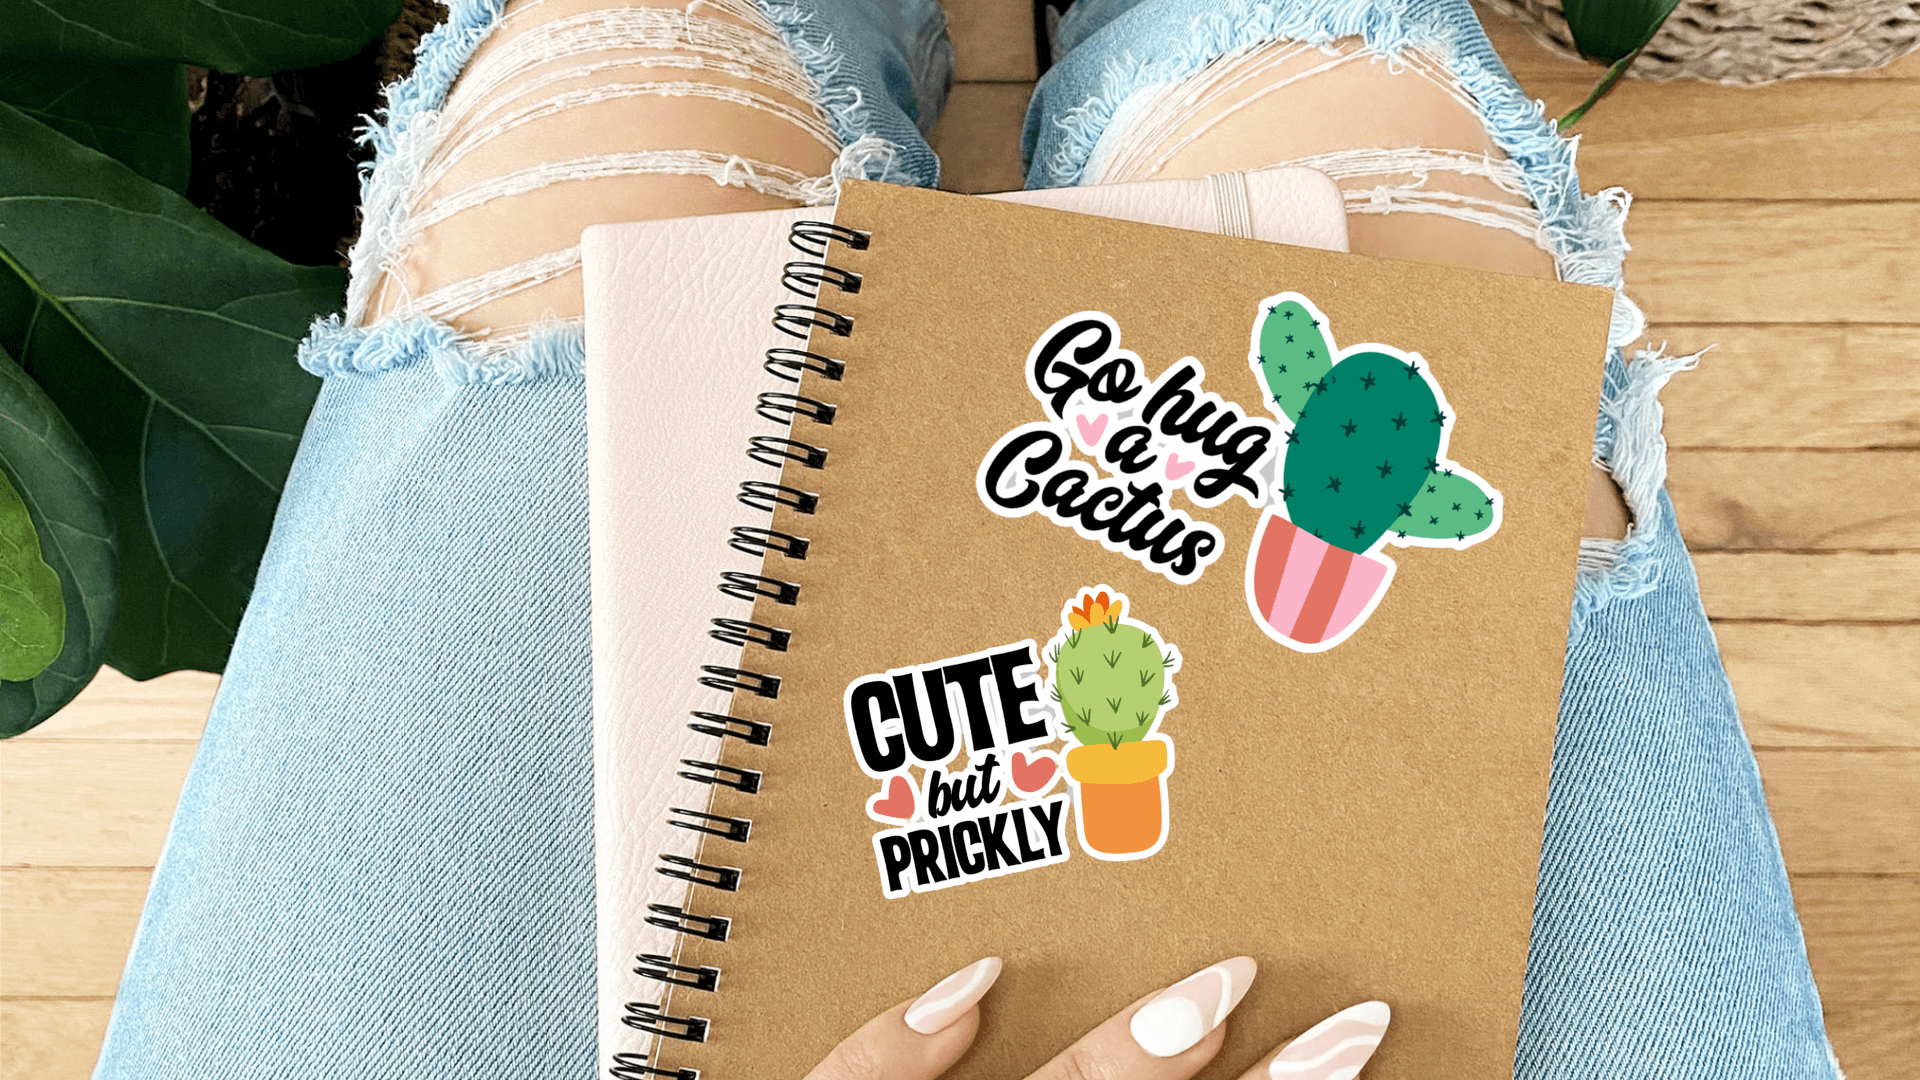 Set of cactus stickers made with a Cricut machine.